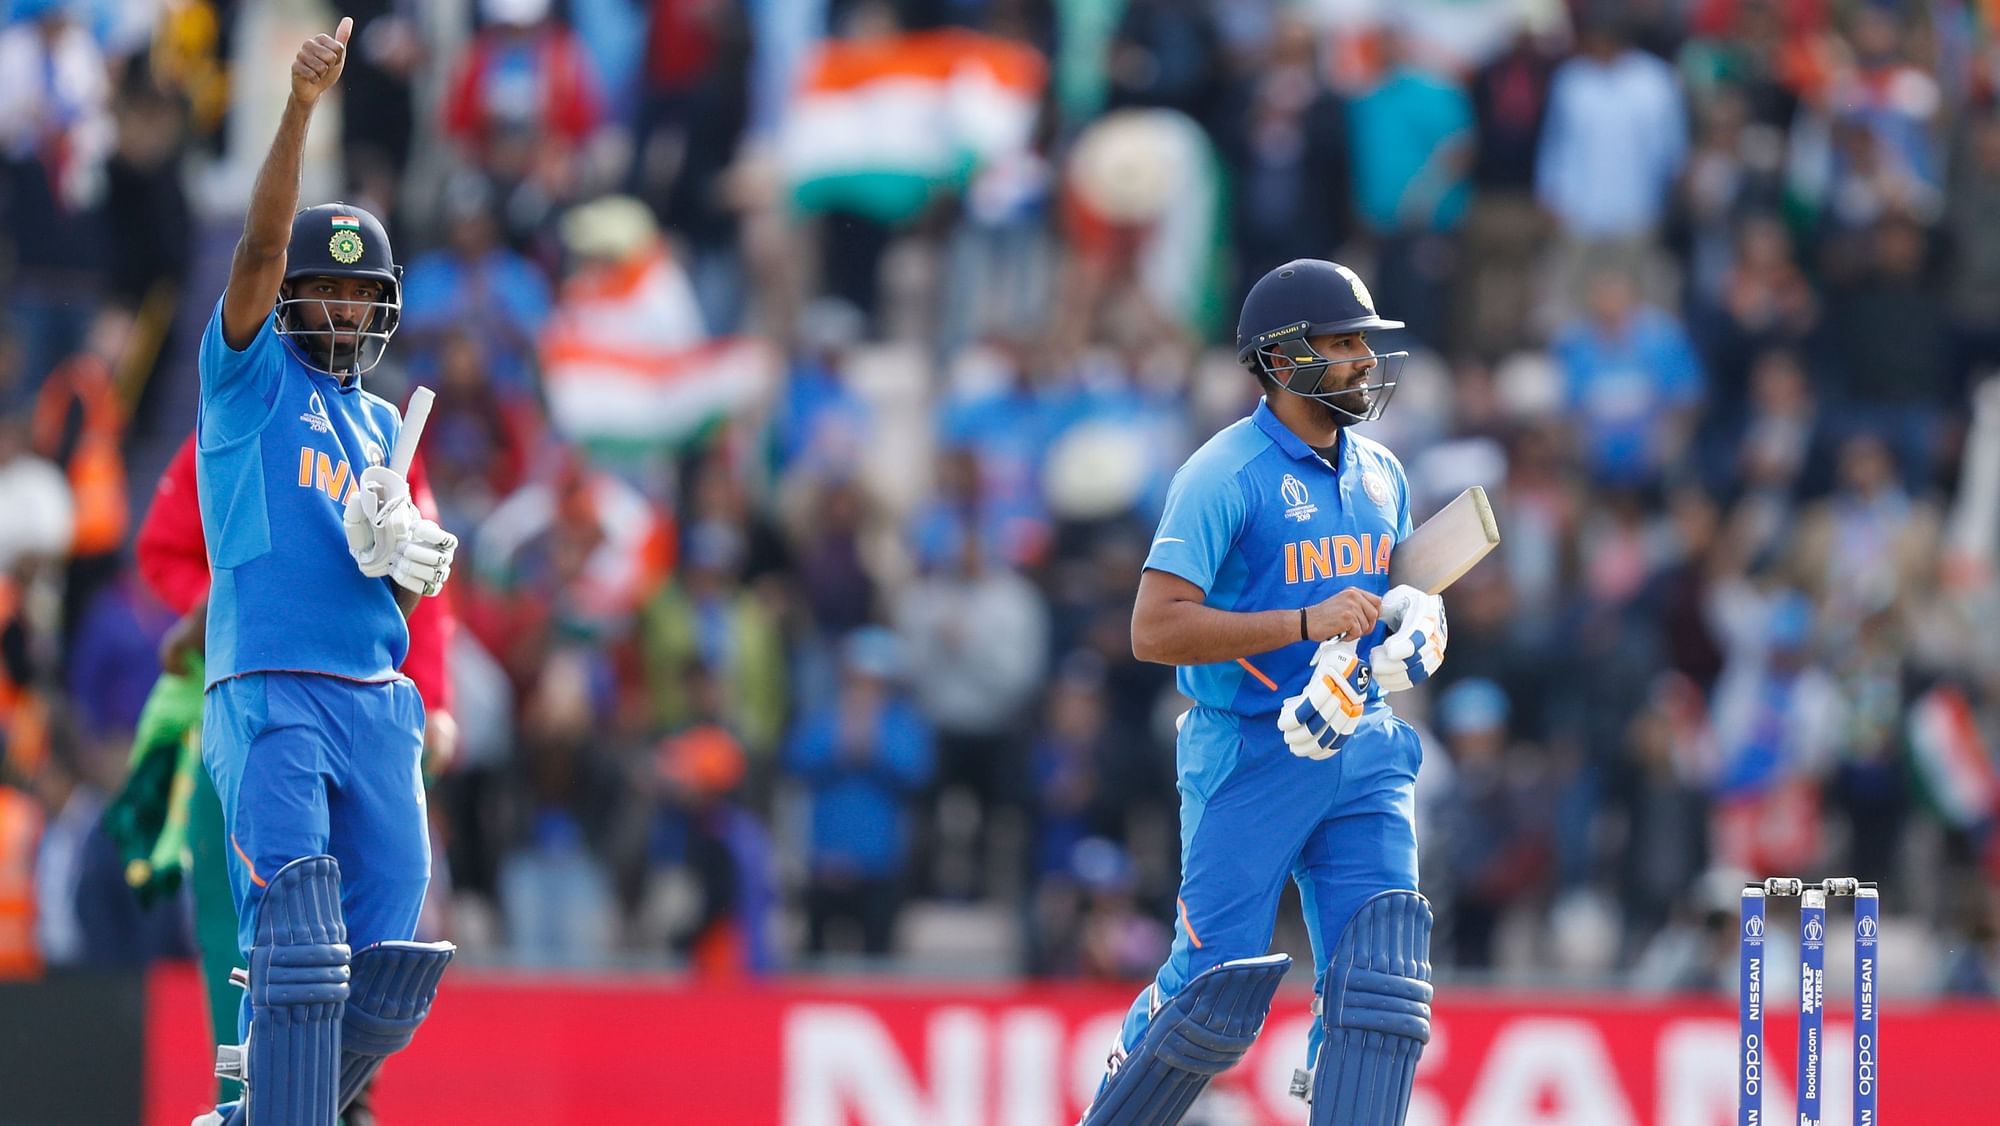 India vs SA Live Score, Cricket World Cup 2019 Live Score Updates India Beat South Africa by 6 Wickets